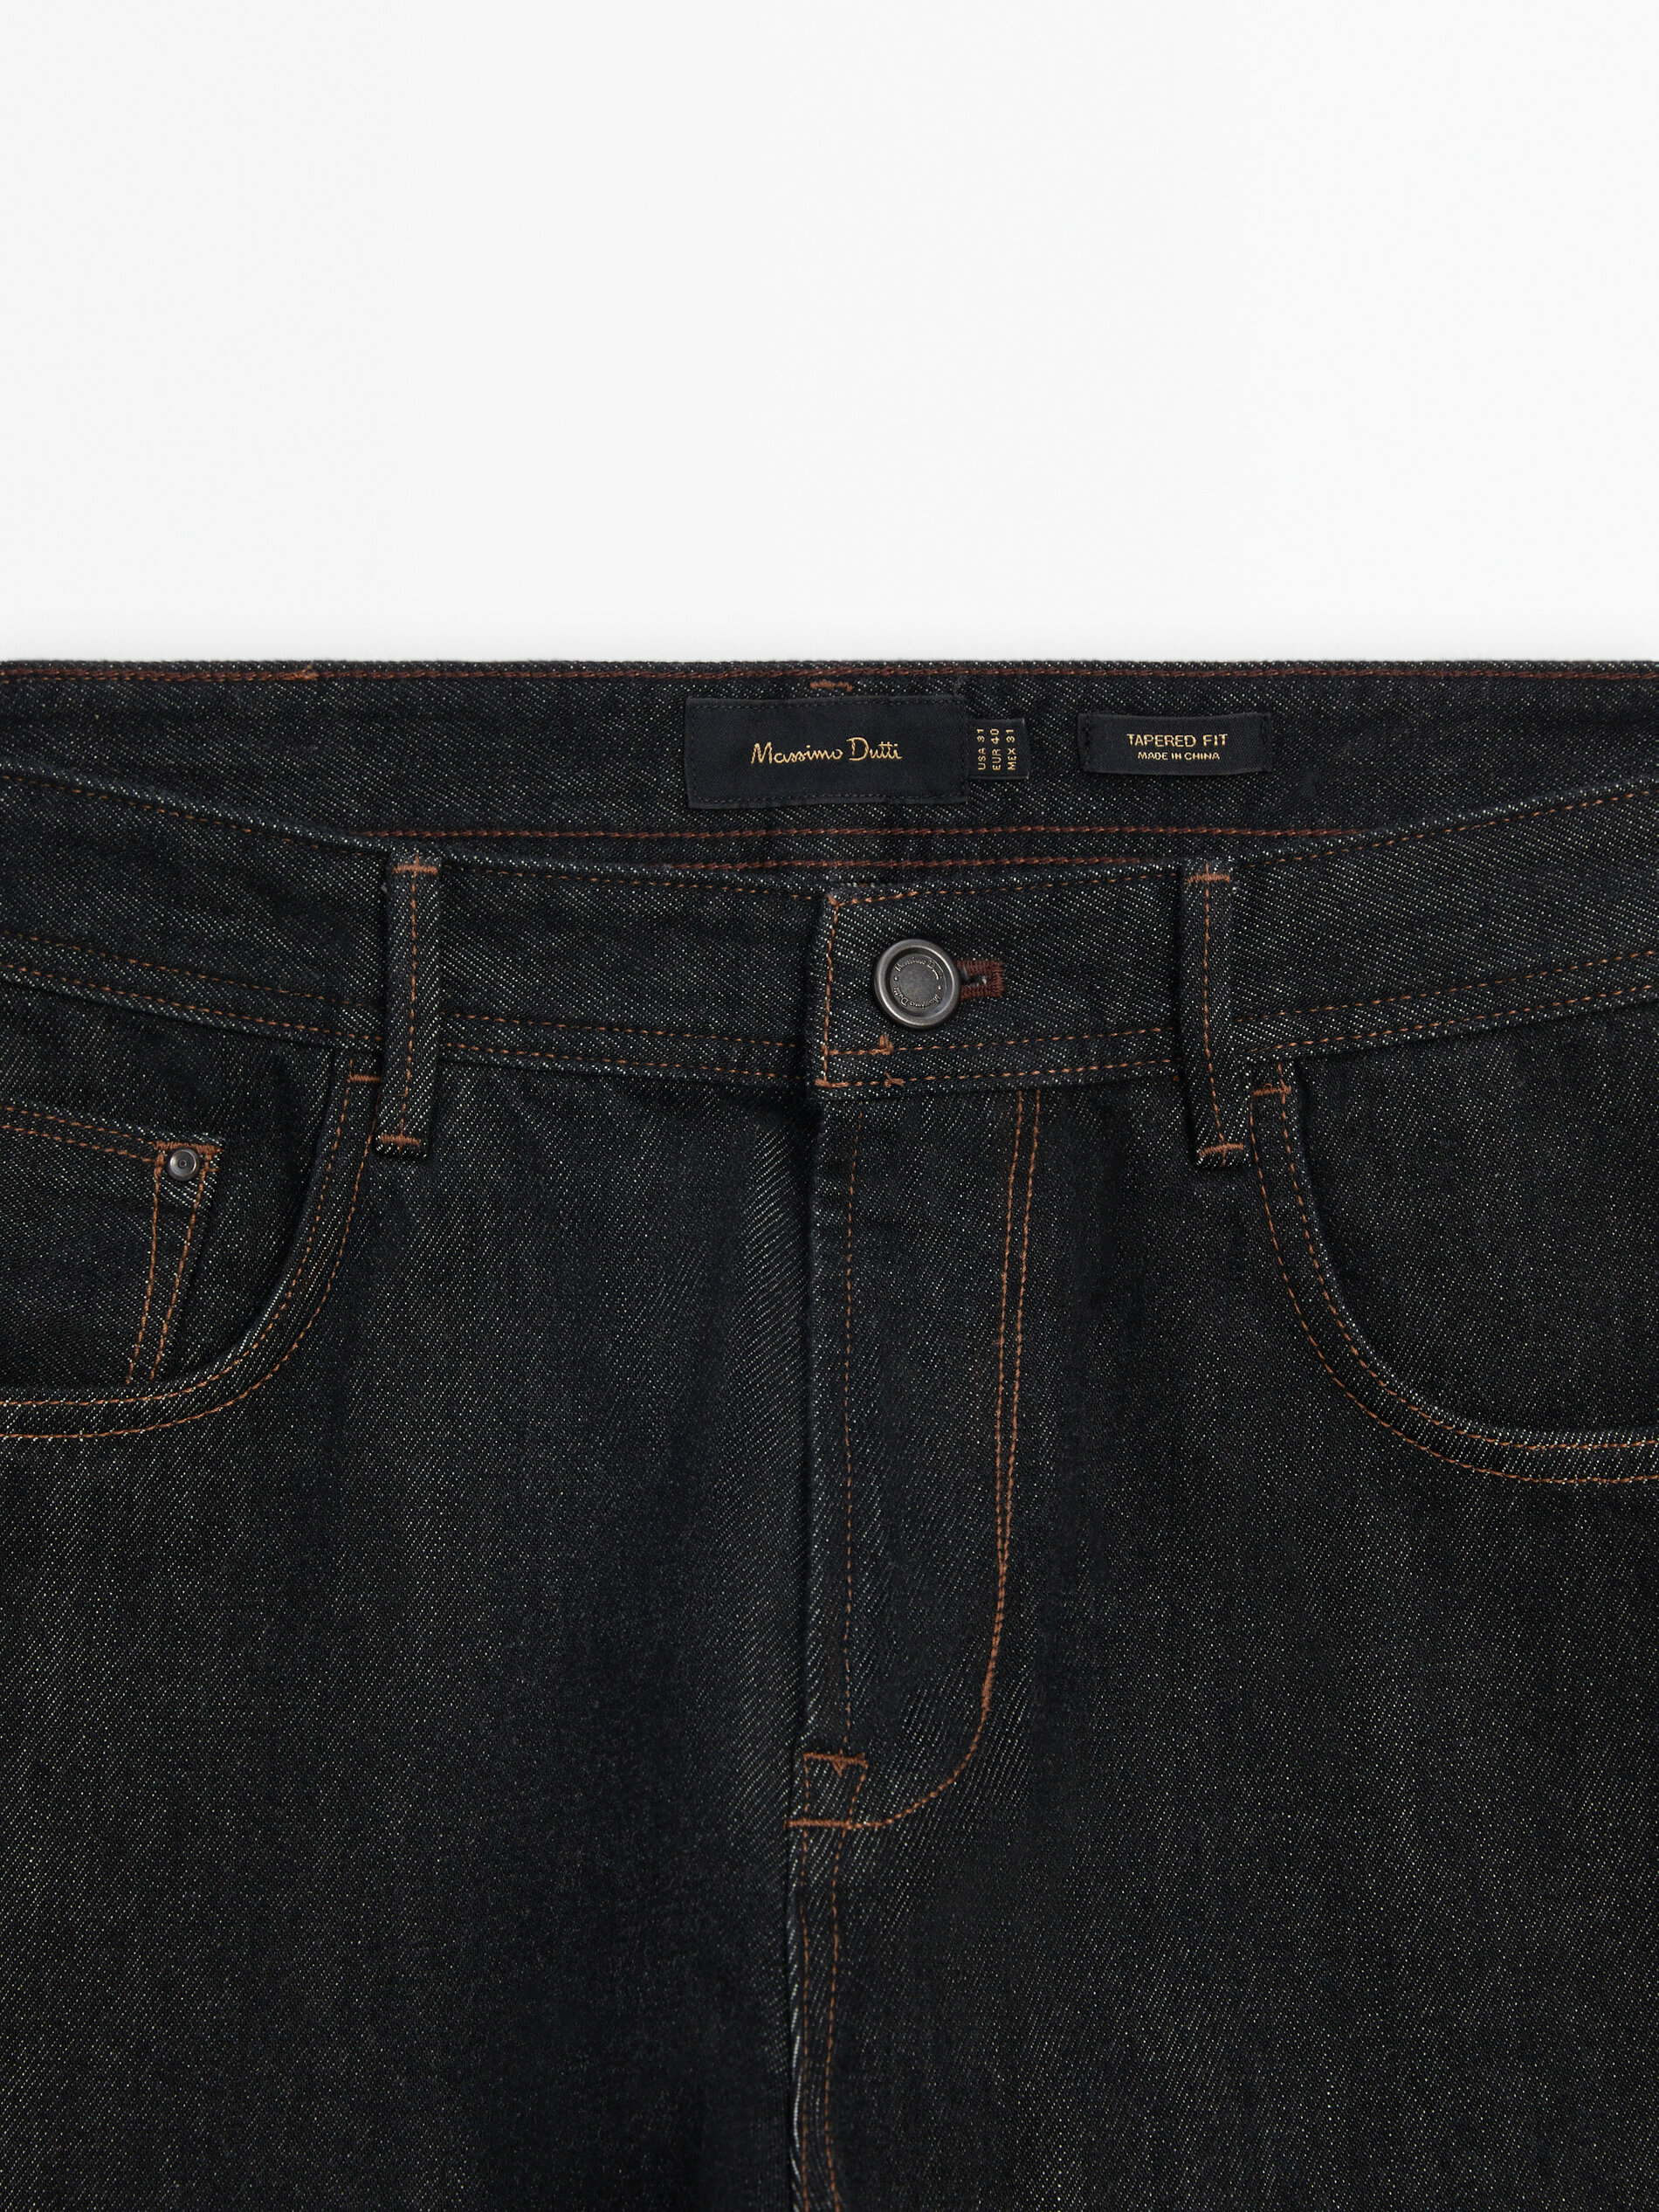 Jeans selvedge rinse wash tapered fit